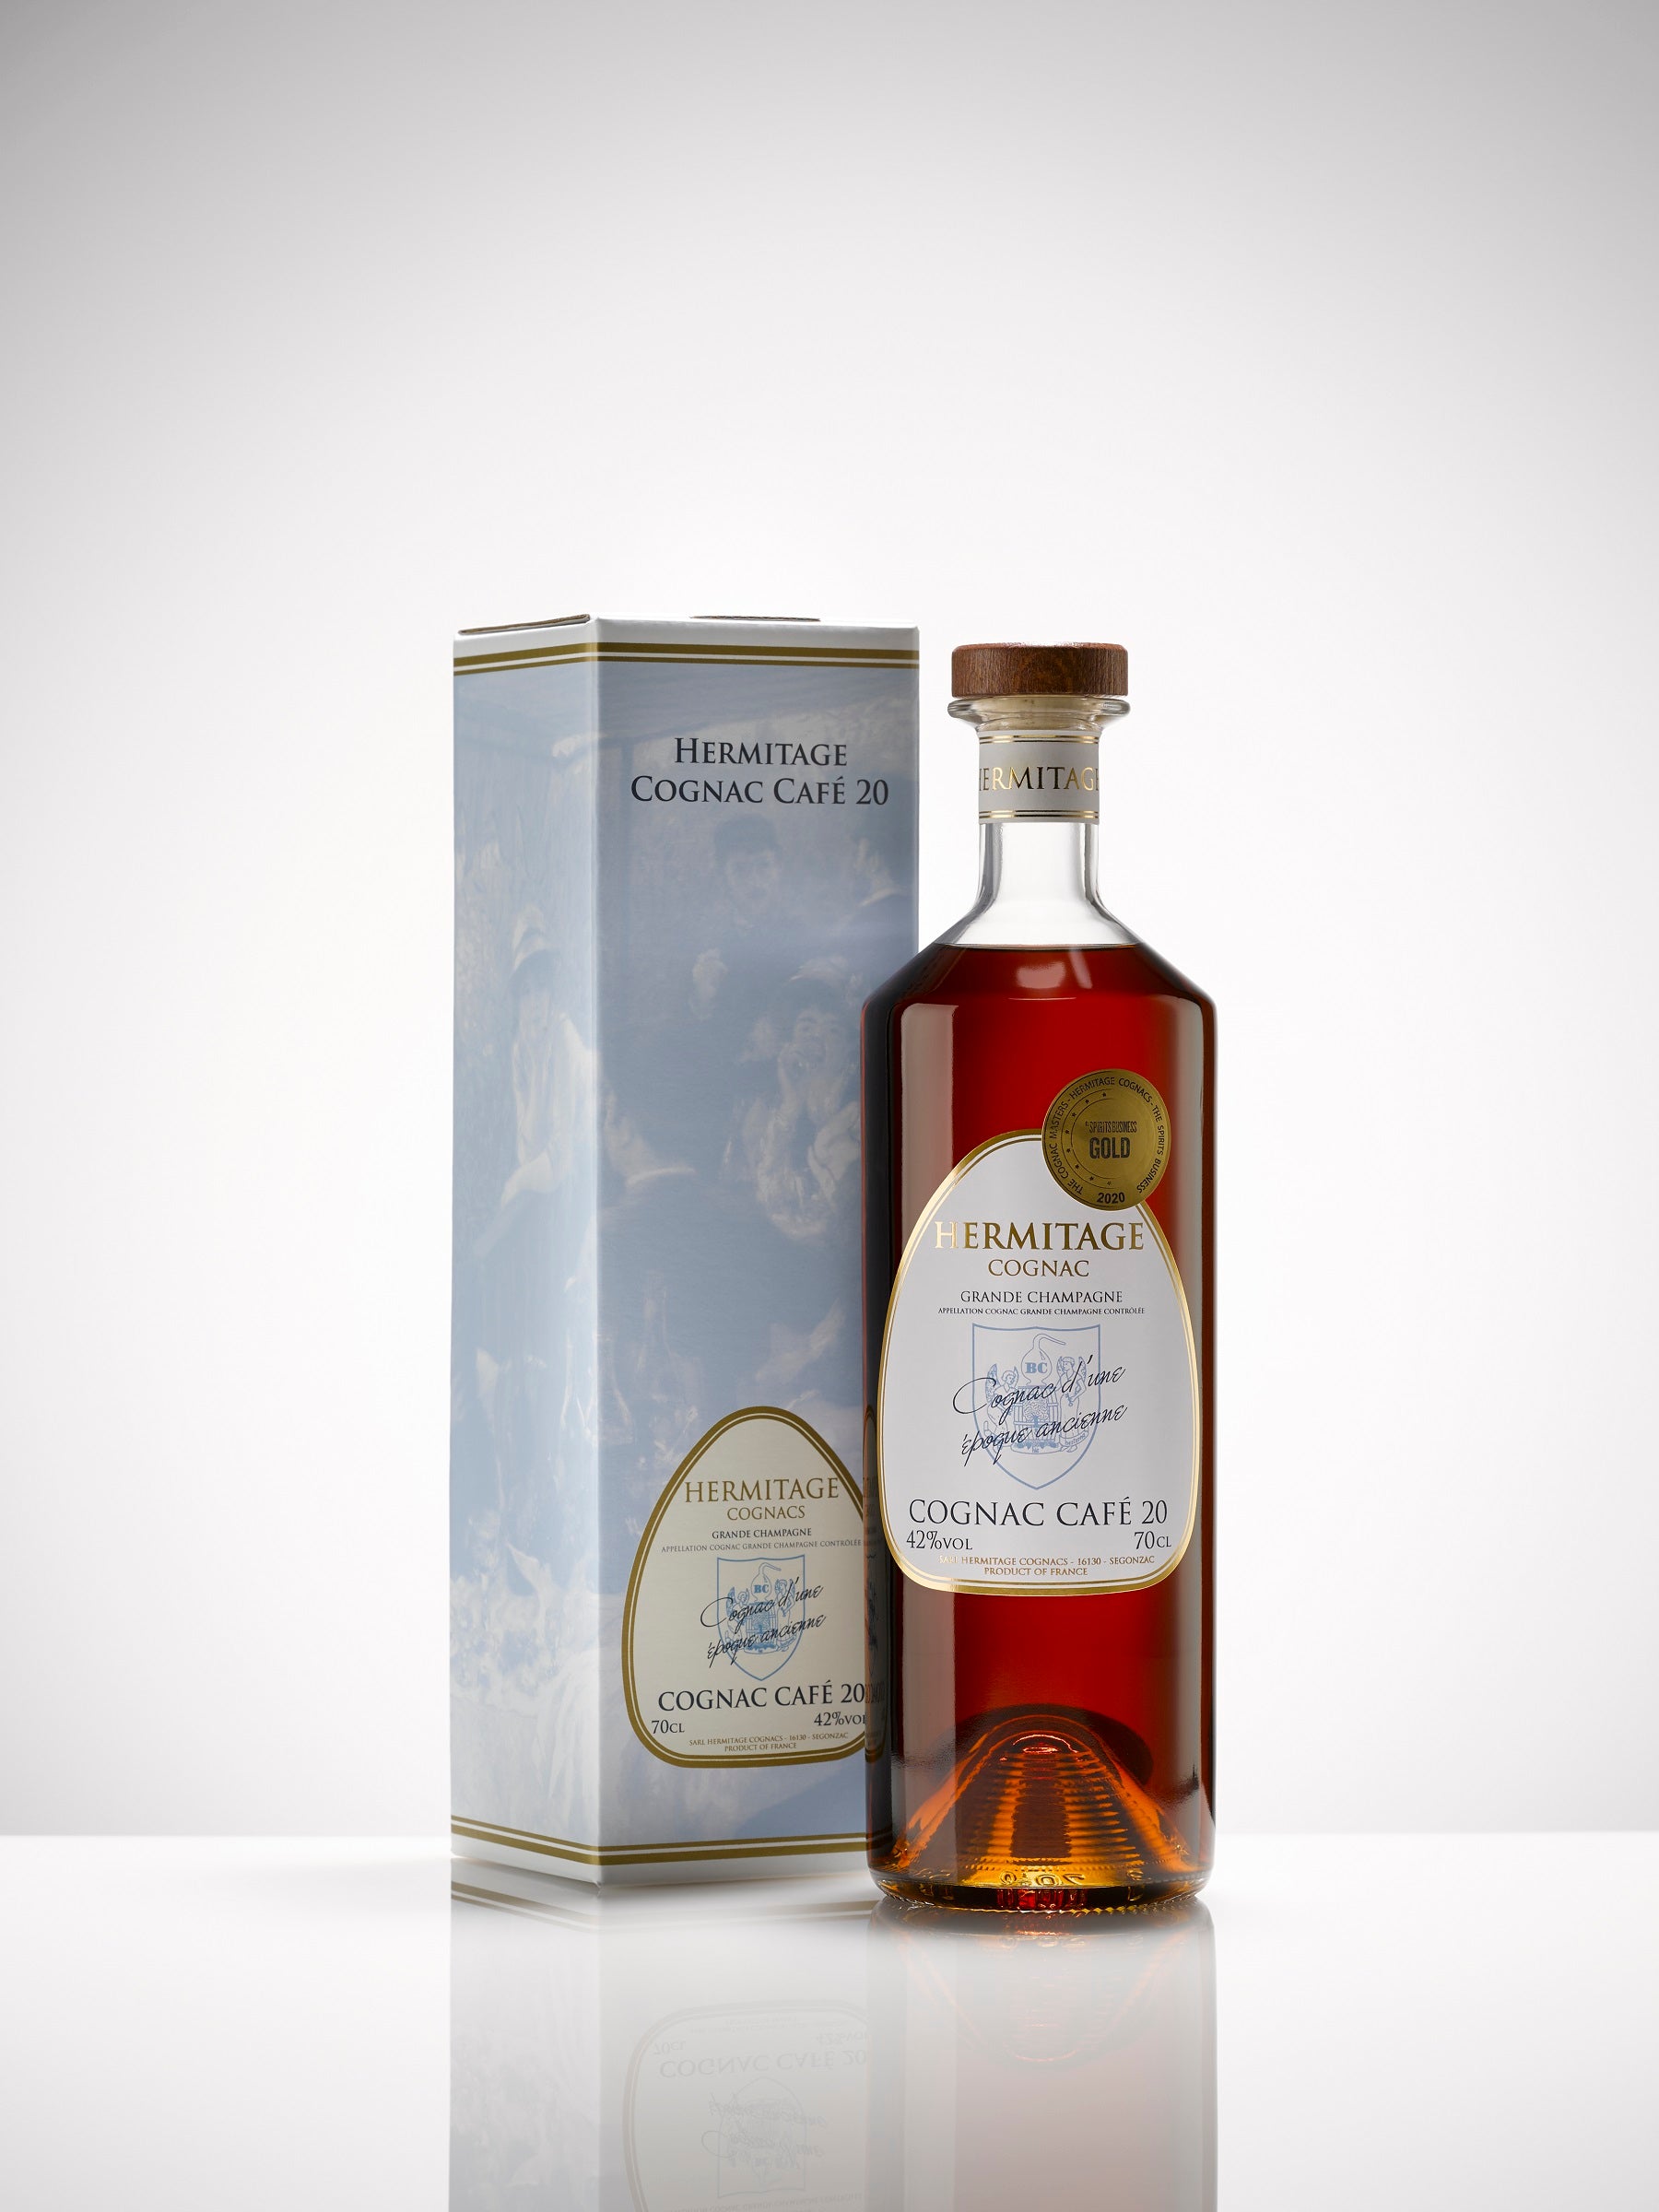 Bottle of Hermitage Café 20 Grand Champagne Cognac, 42% - The Spirits Room